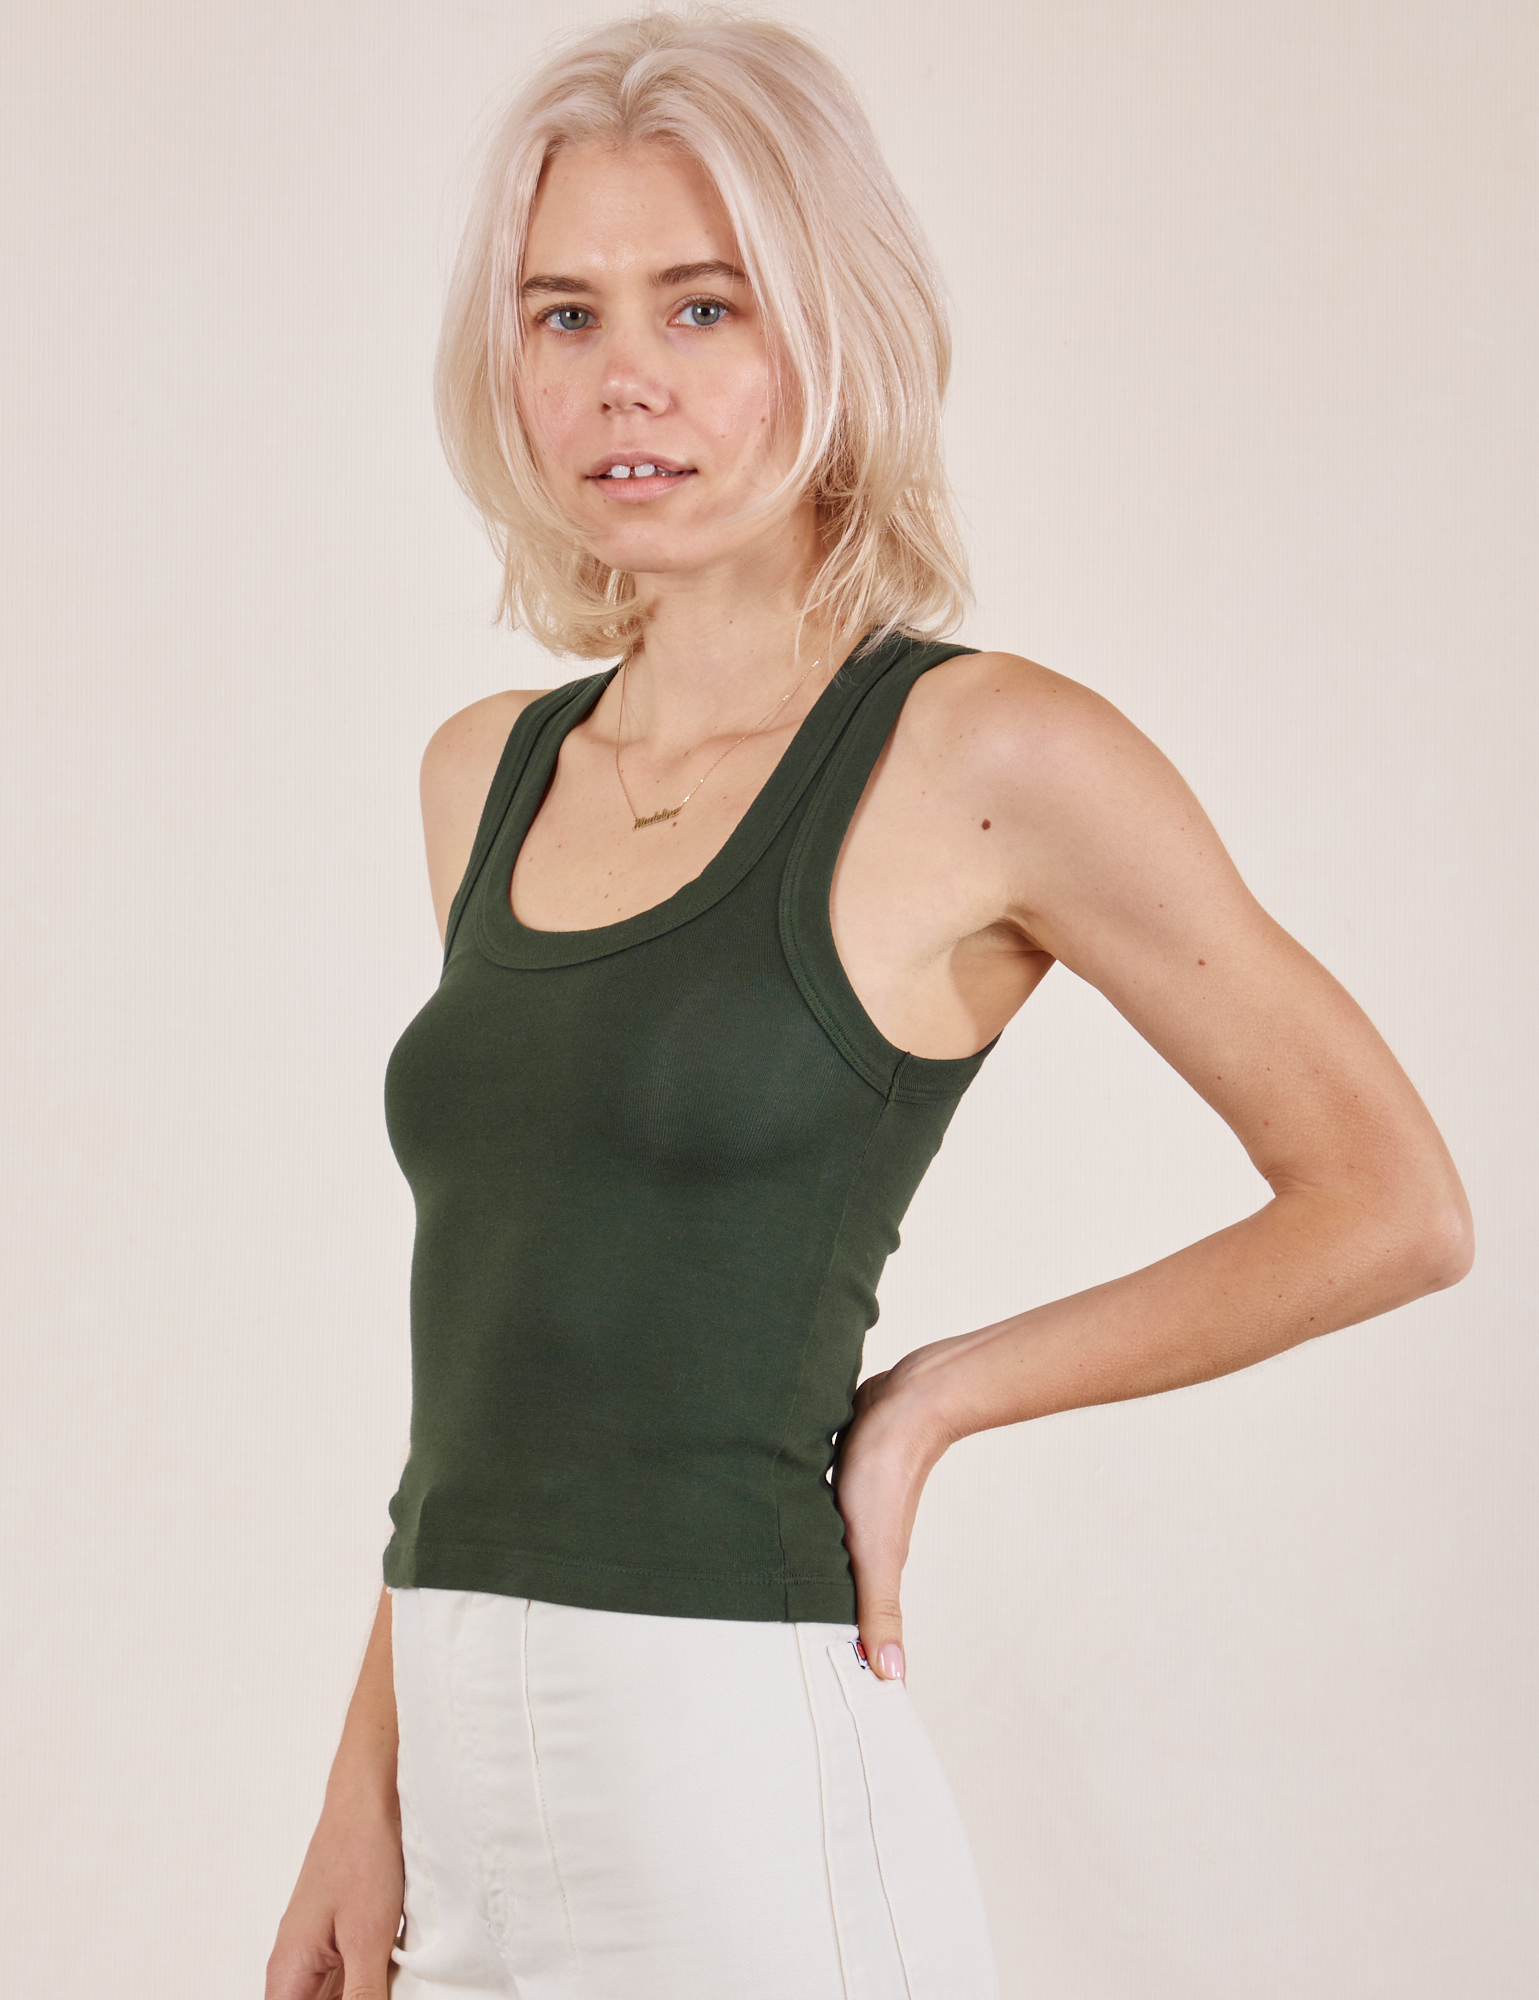 Tank Top in Swamp Green side view on Madeline